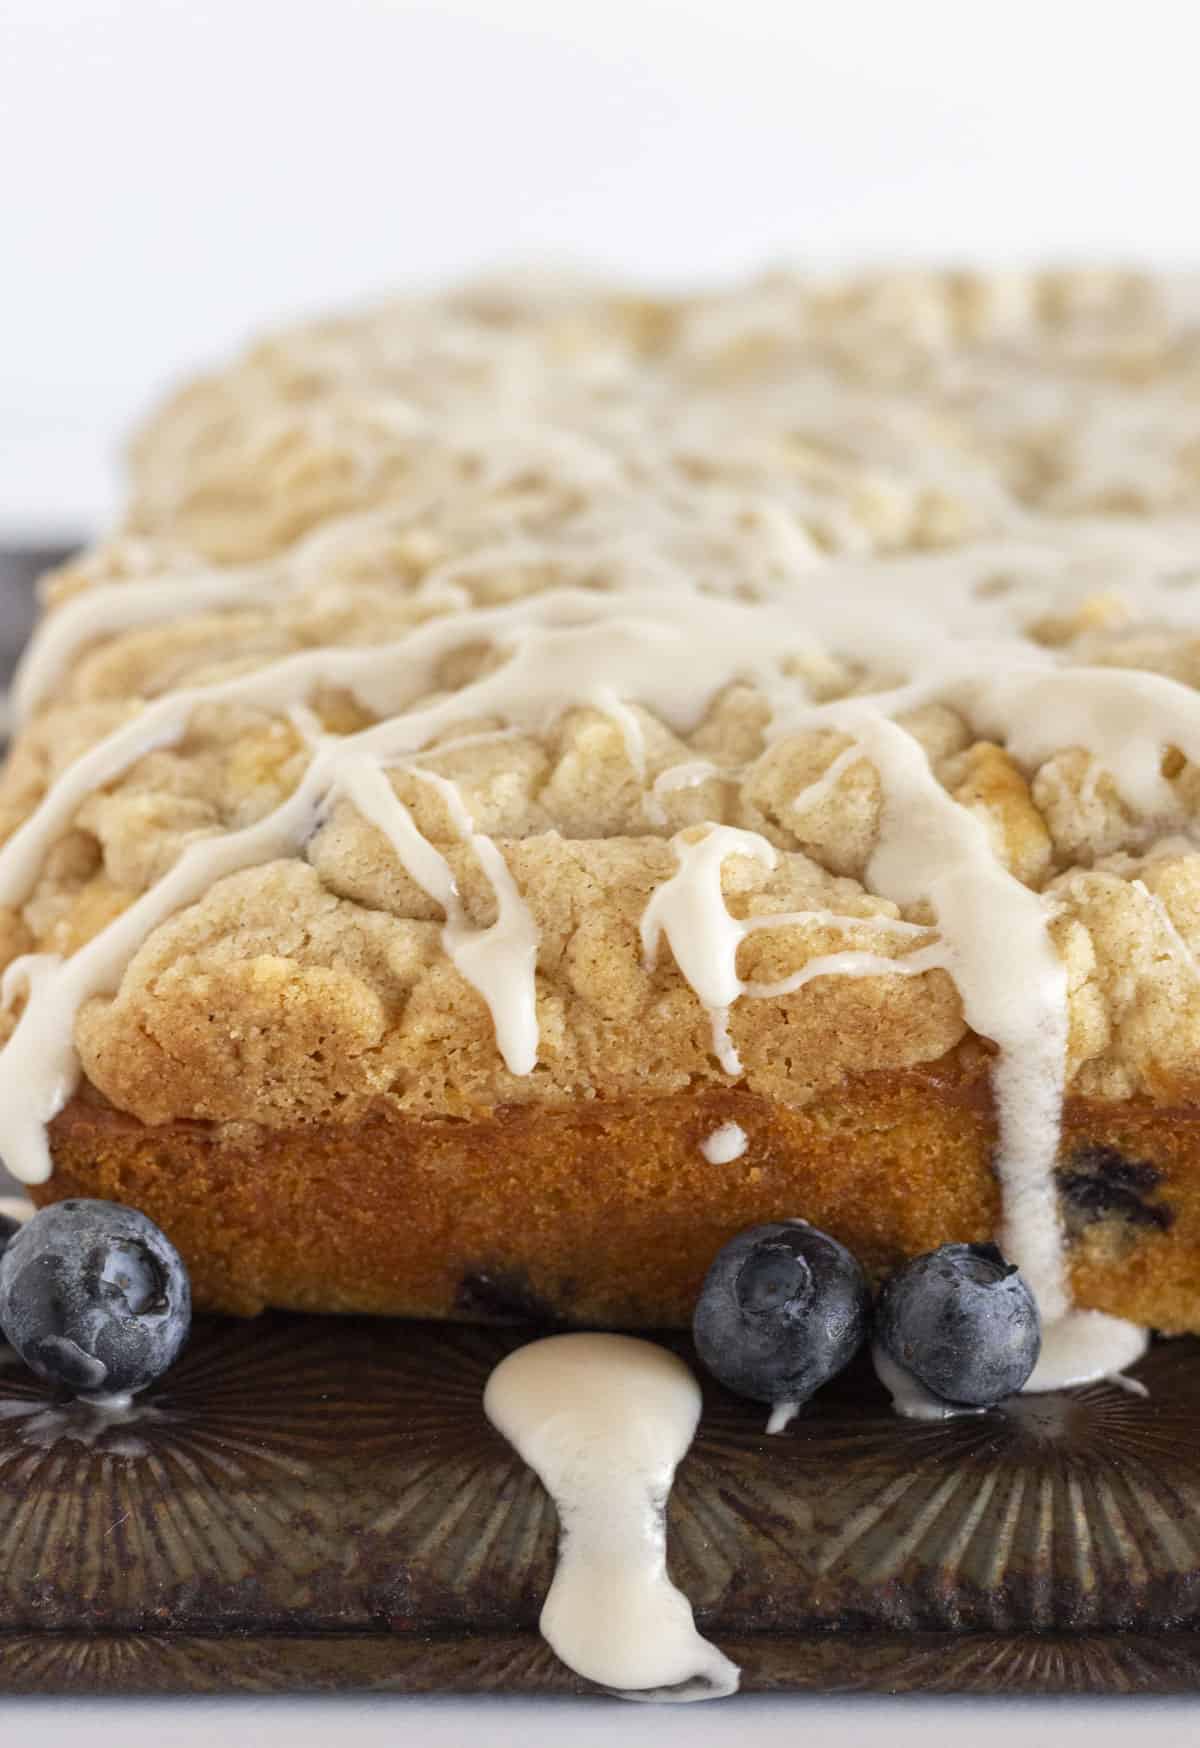 A fresh blueberry muffin cake with a drizzle of glaze.